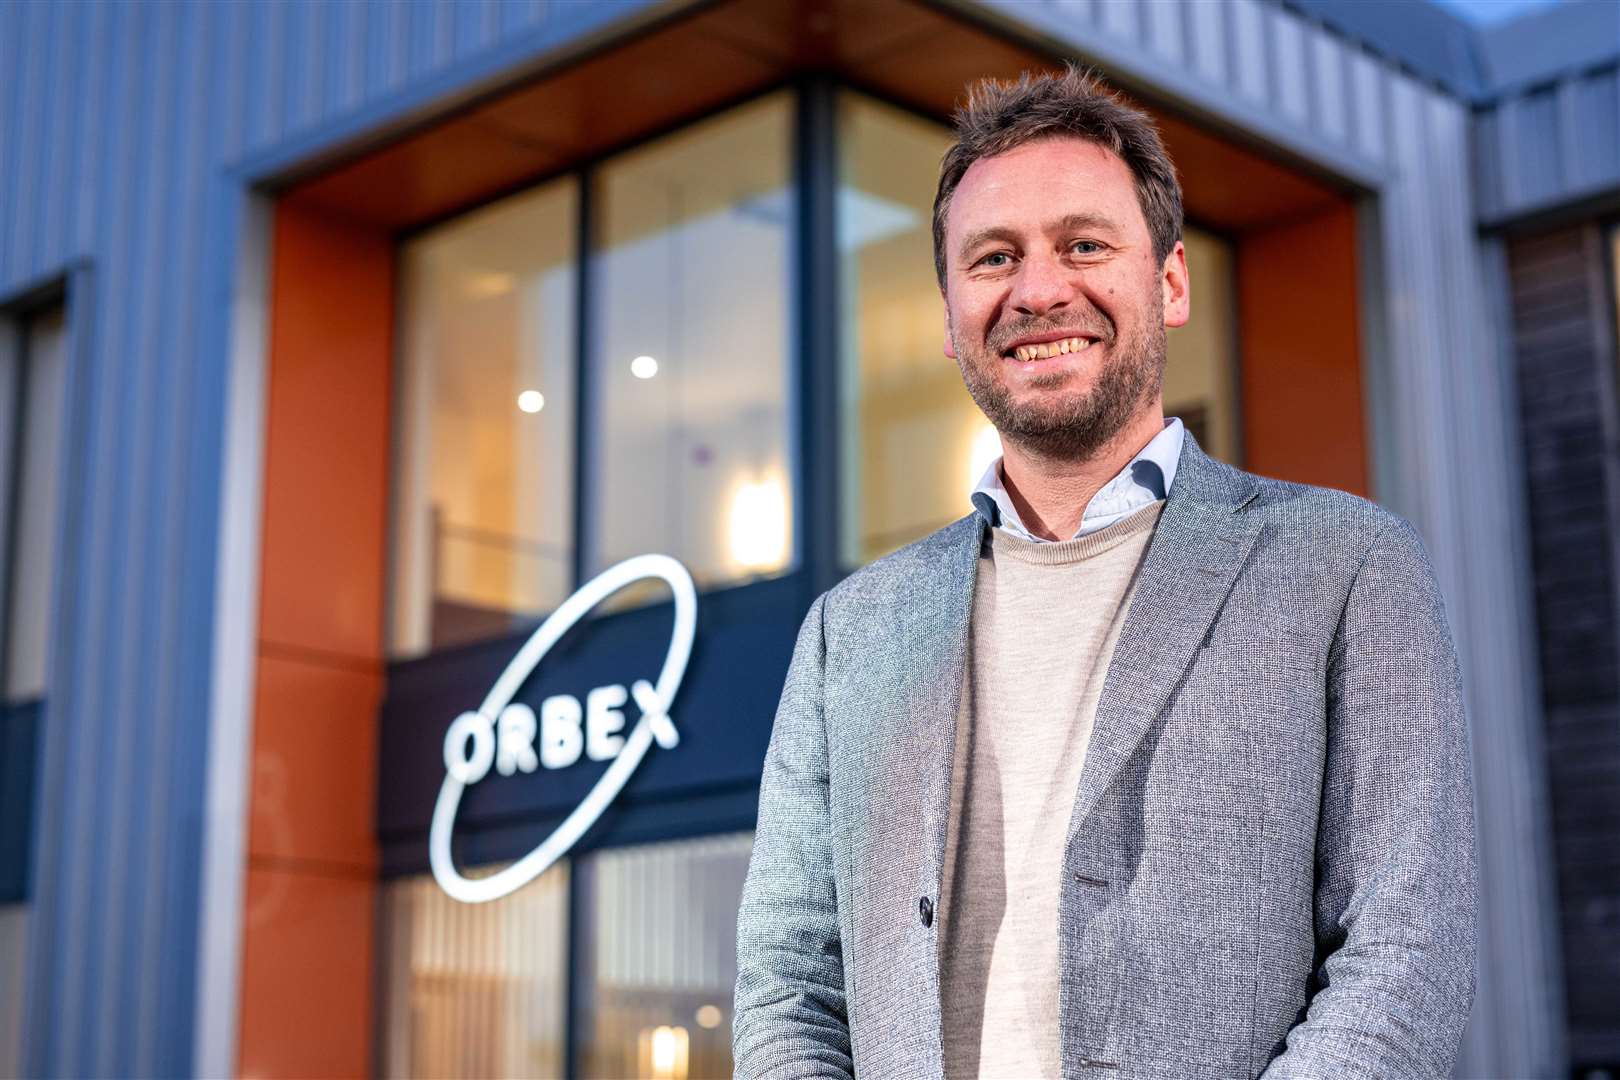 Phillip Chambers, who has been confirmed as the CEO of Orbex. Picture: Abermedia